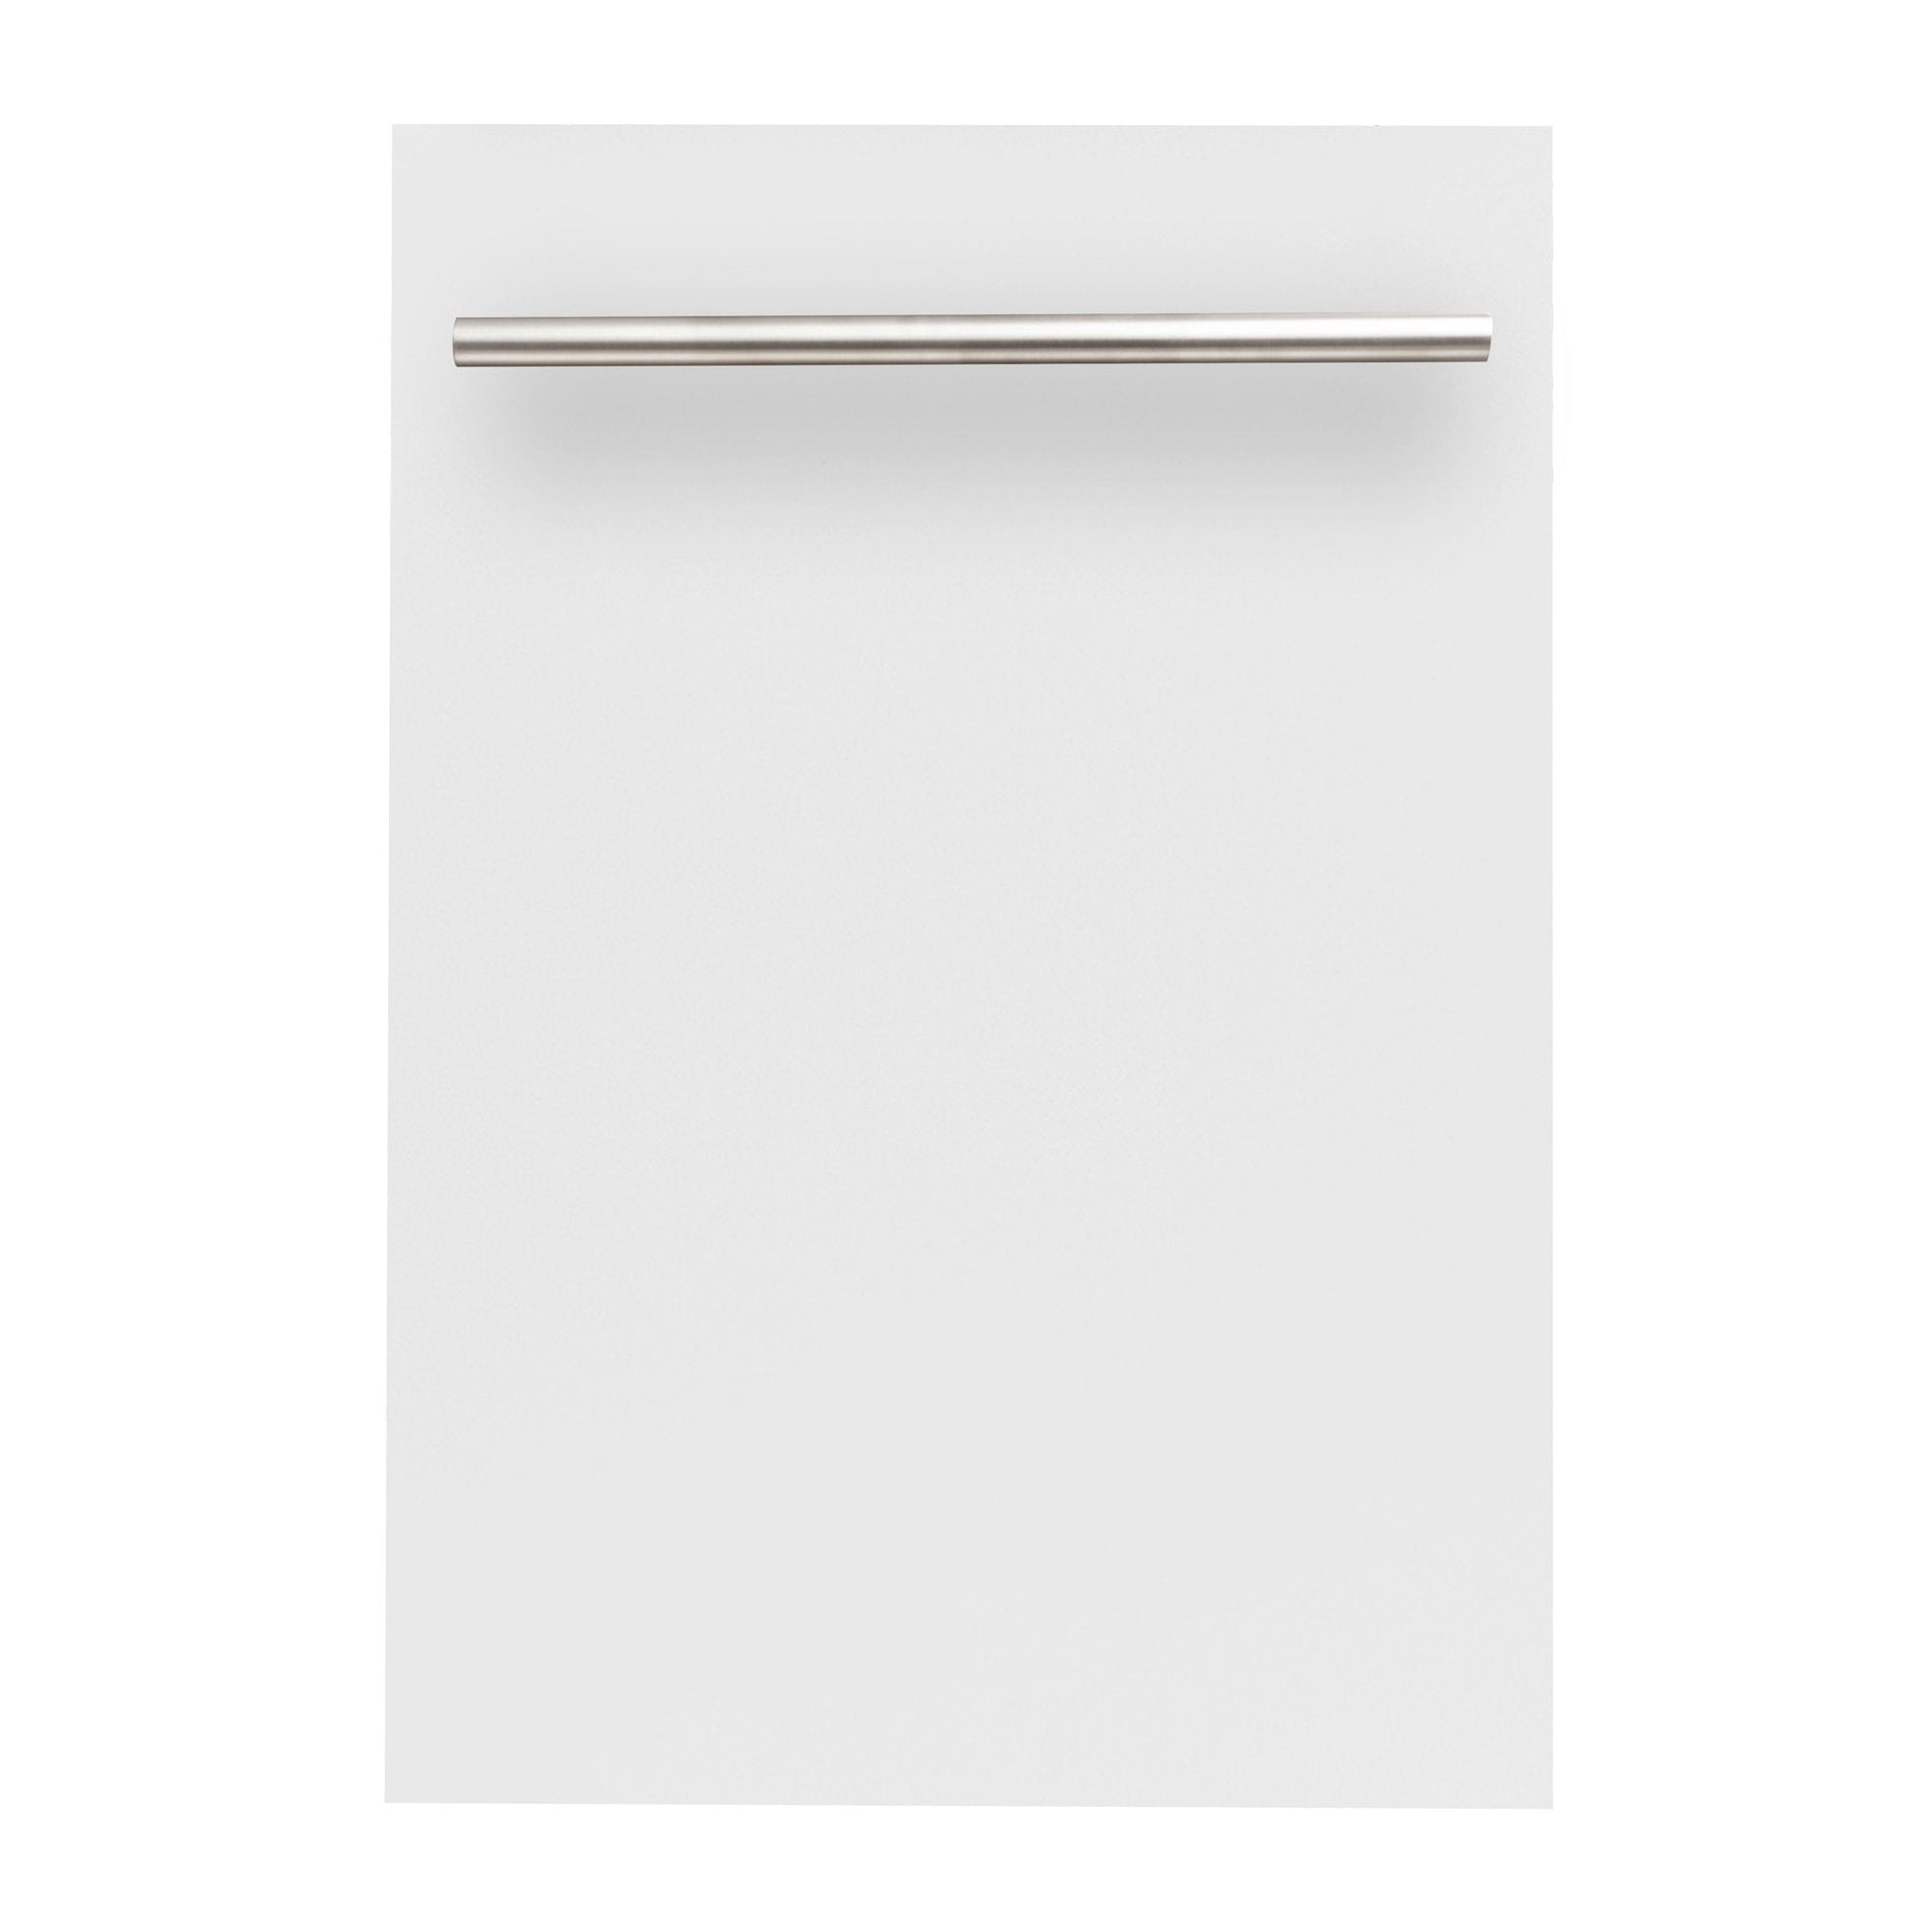 ZLINE 18" Dishwasher Panel - Stainless Steel with Modern Handle